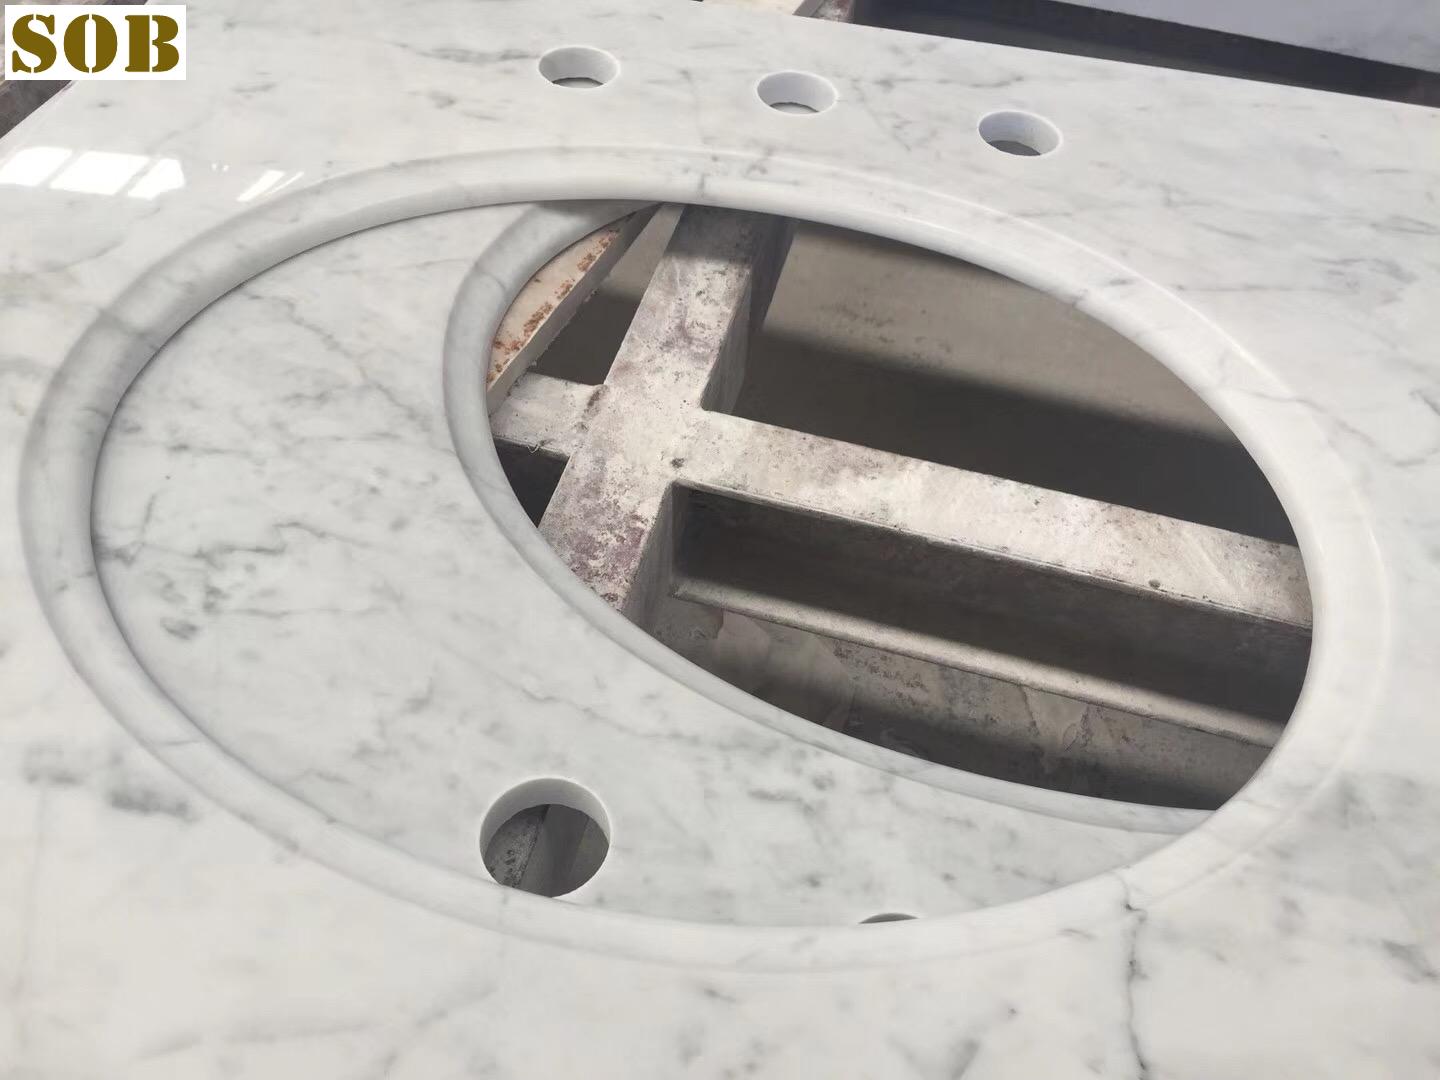 Carrara White Marble Vanity Tops with Undermounted Sink Hole